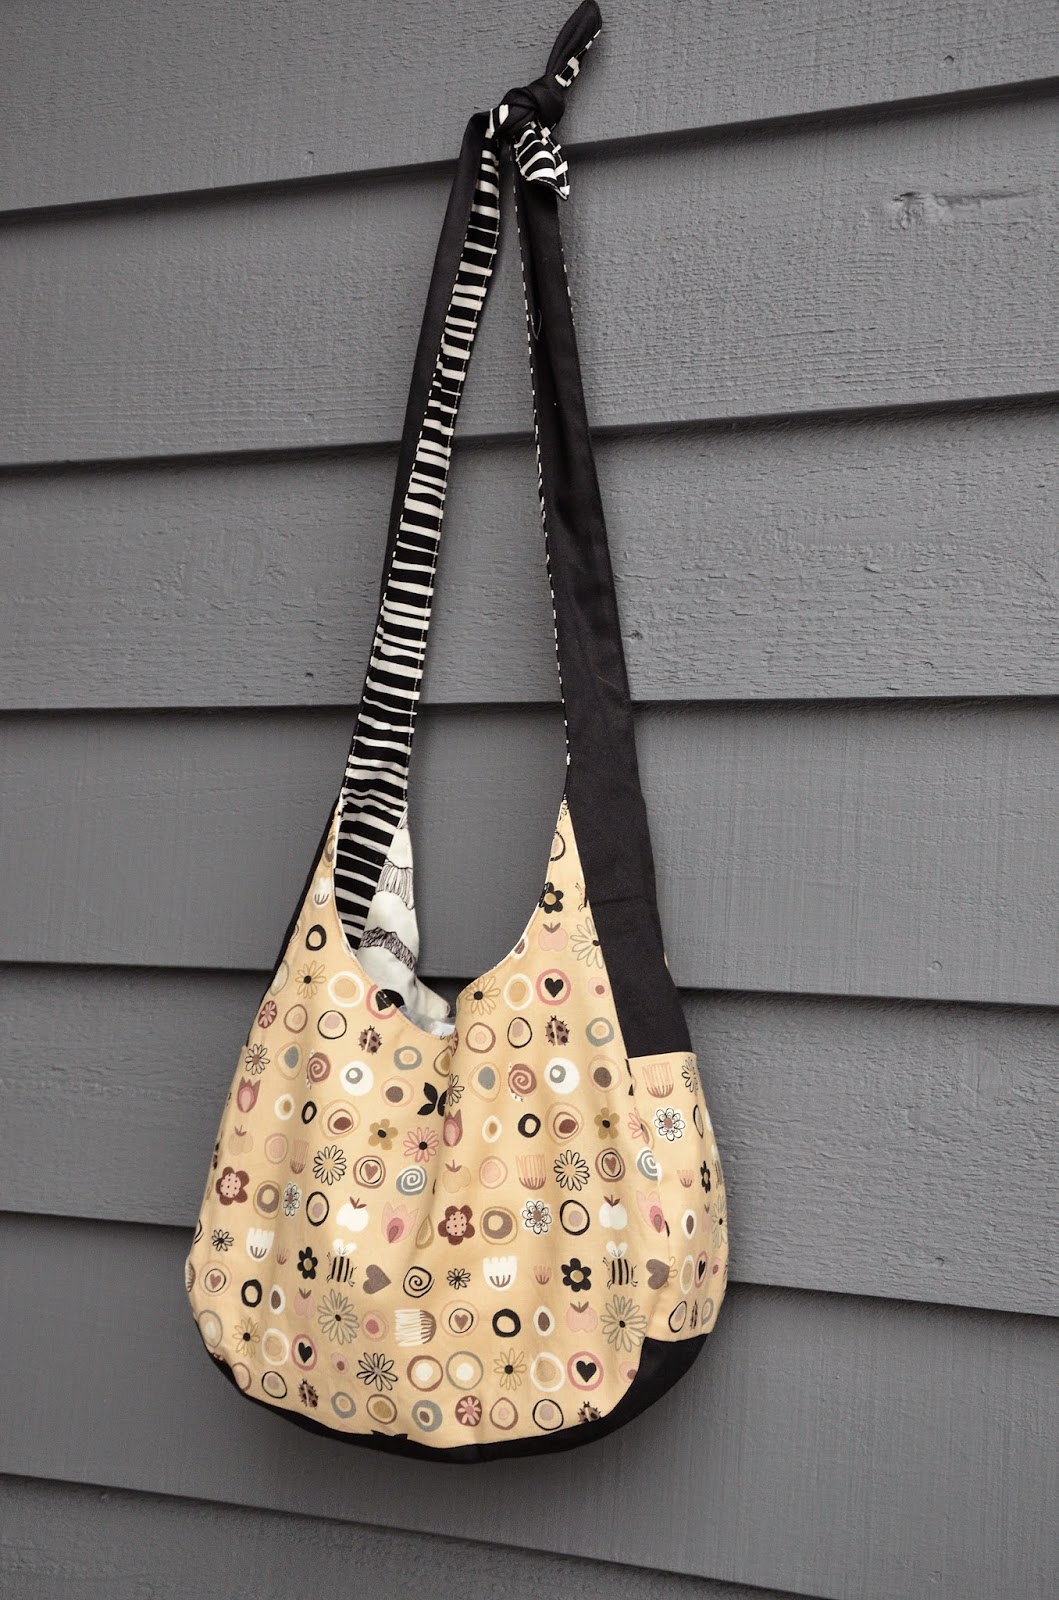 ikat bag: Emily's Slouch Bag and our Christmas Gift To You